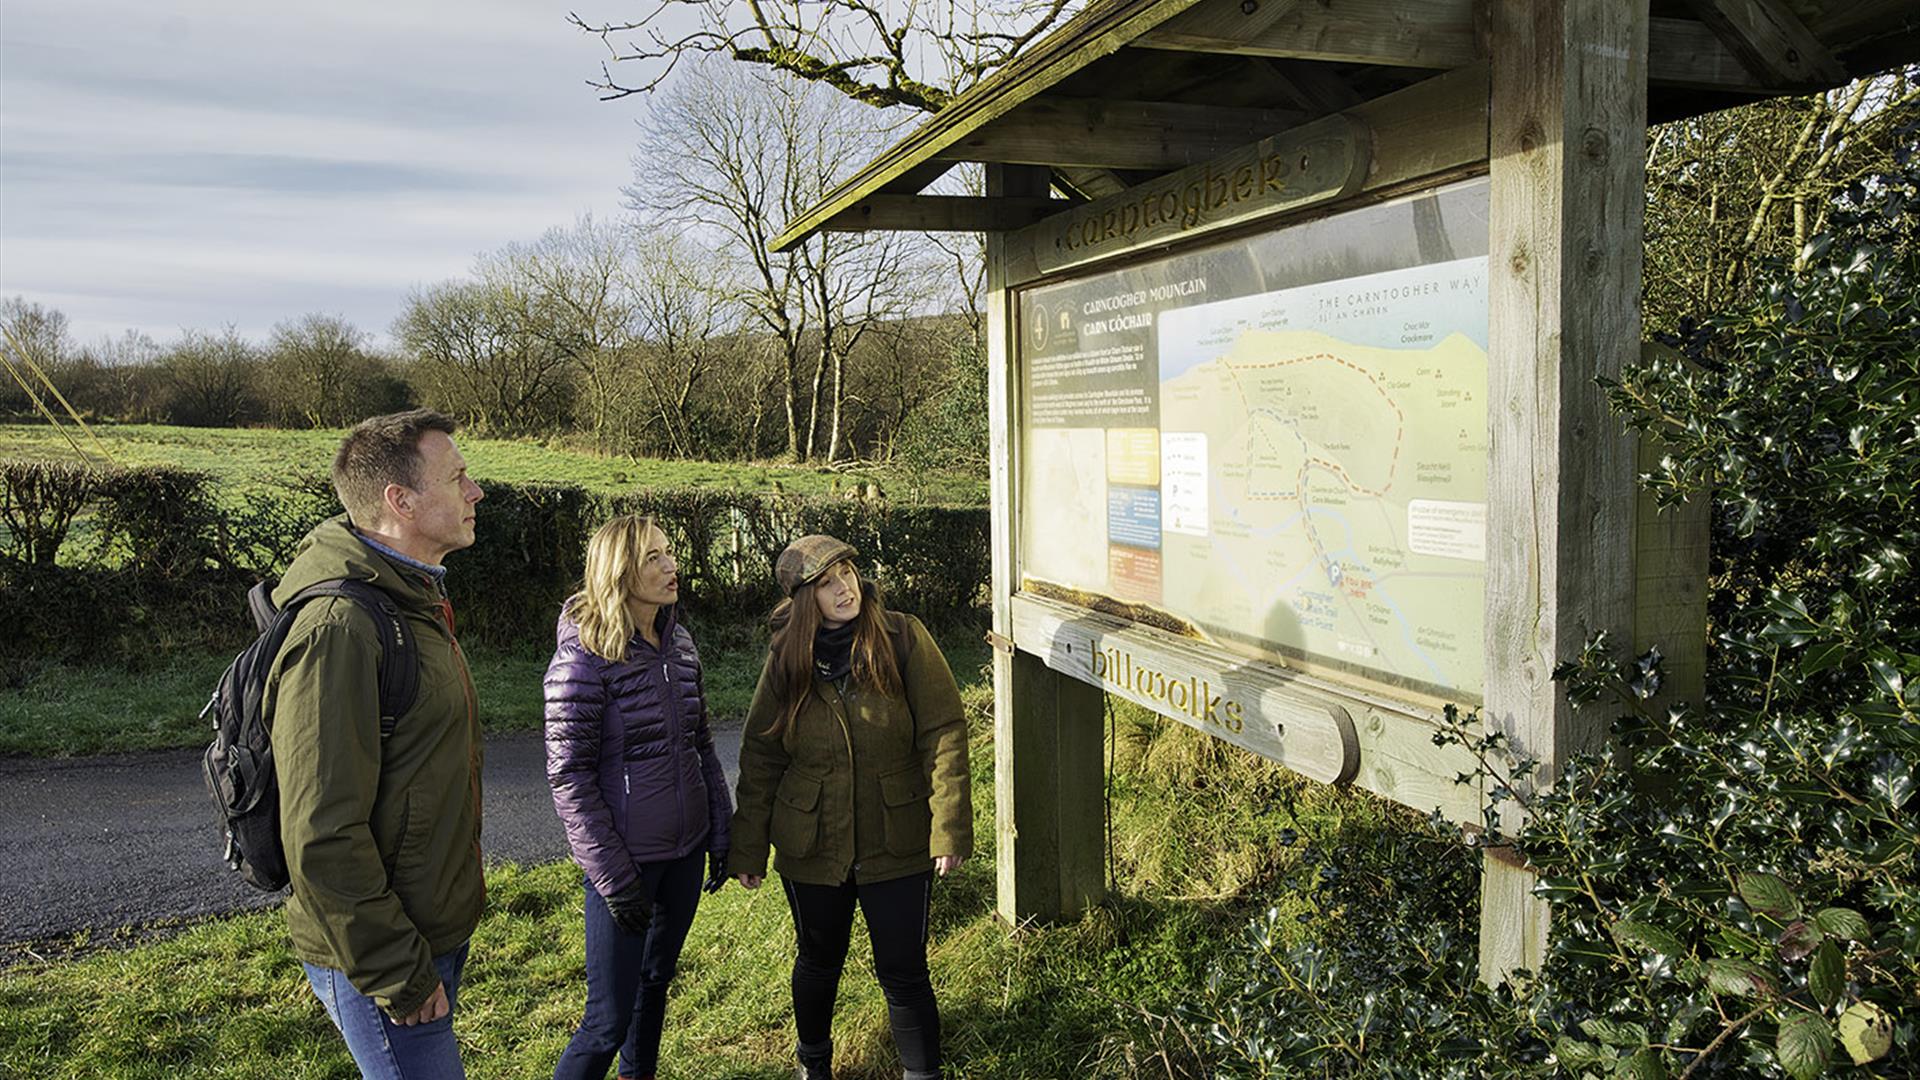 A group looking at signage at the start of Carntogher Heritage Trail